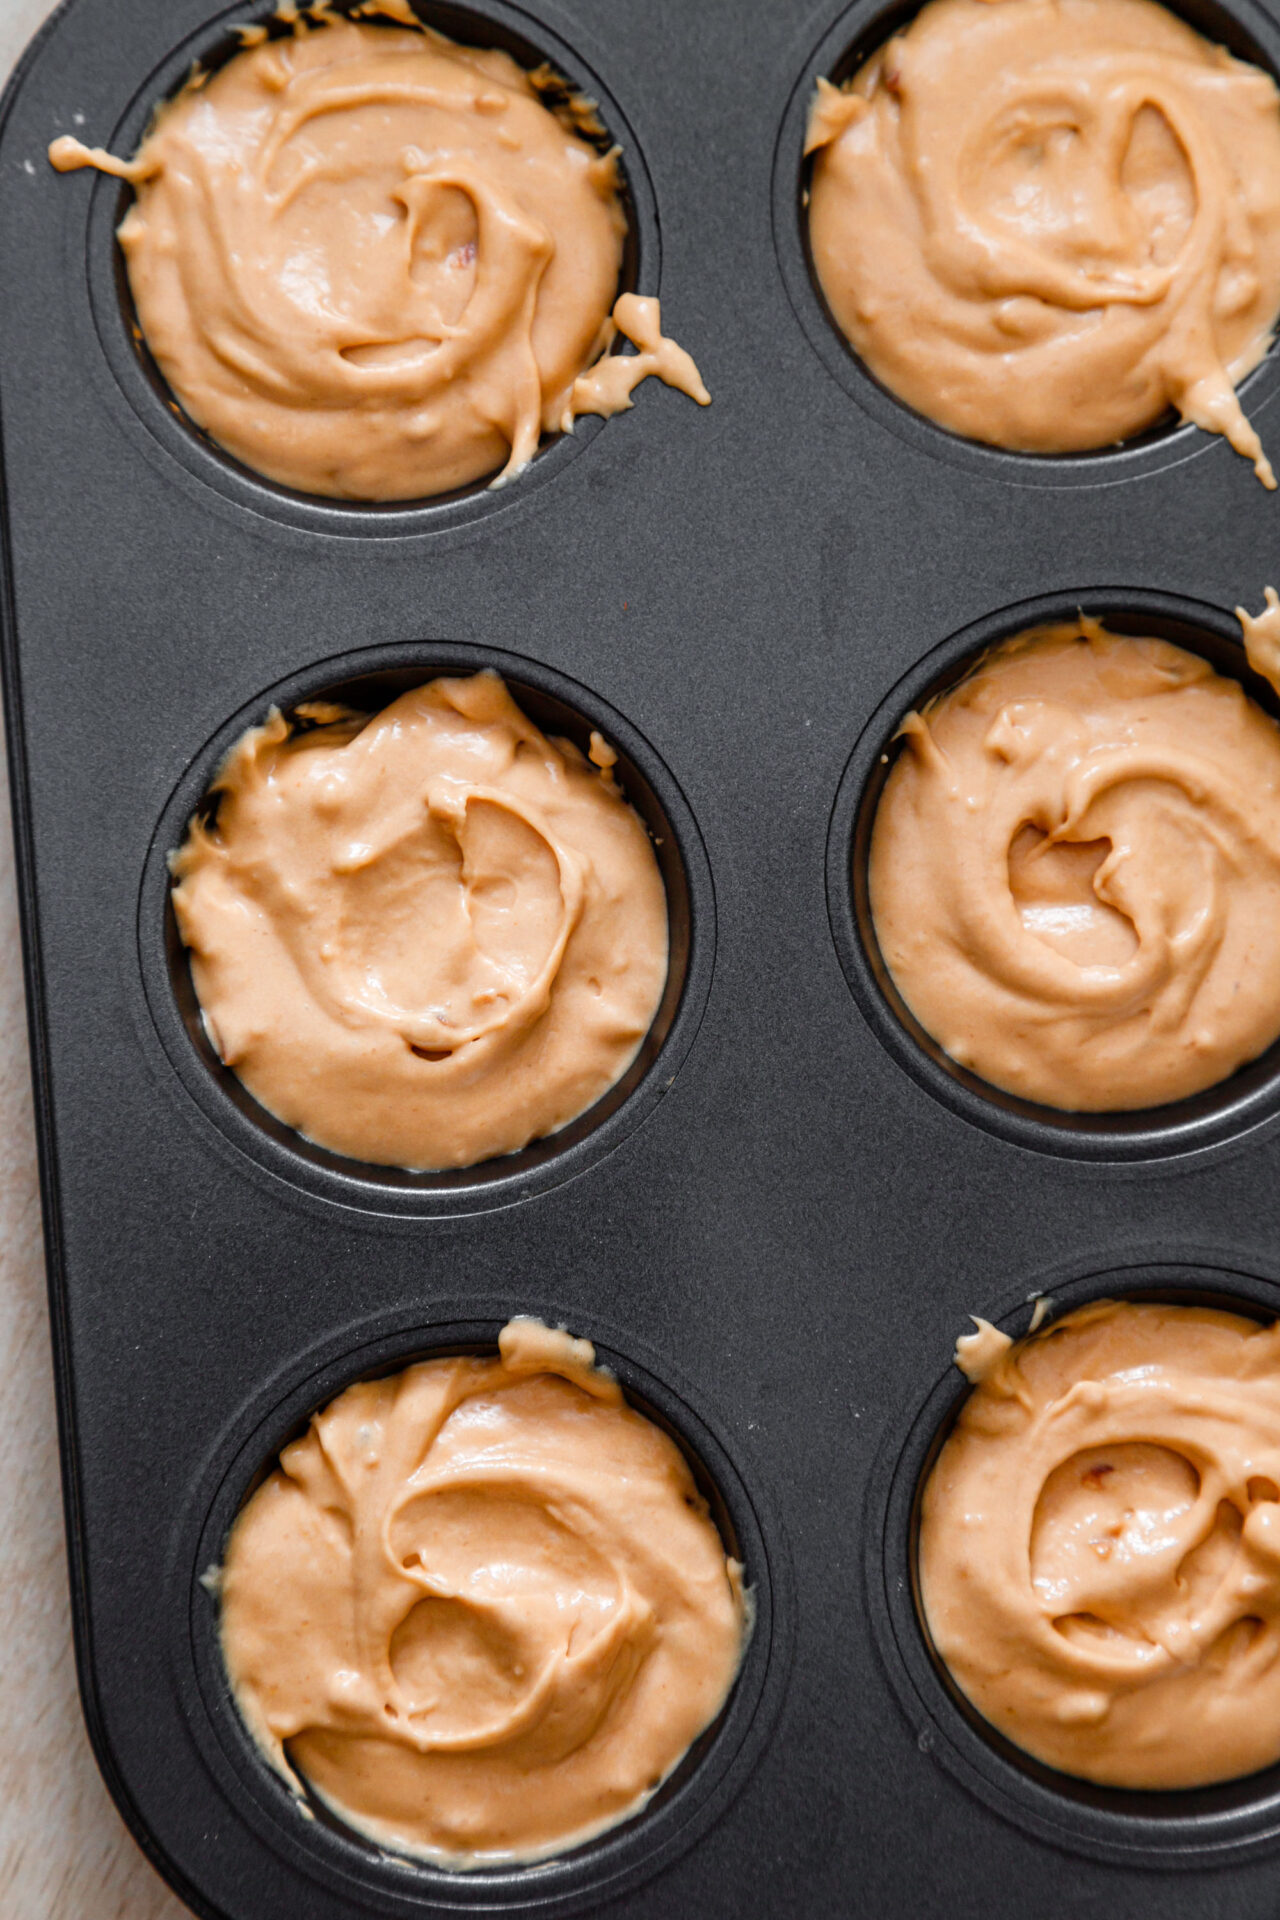 Amish Peanut Butter Cupcakes